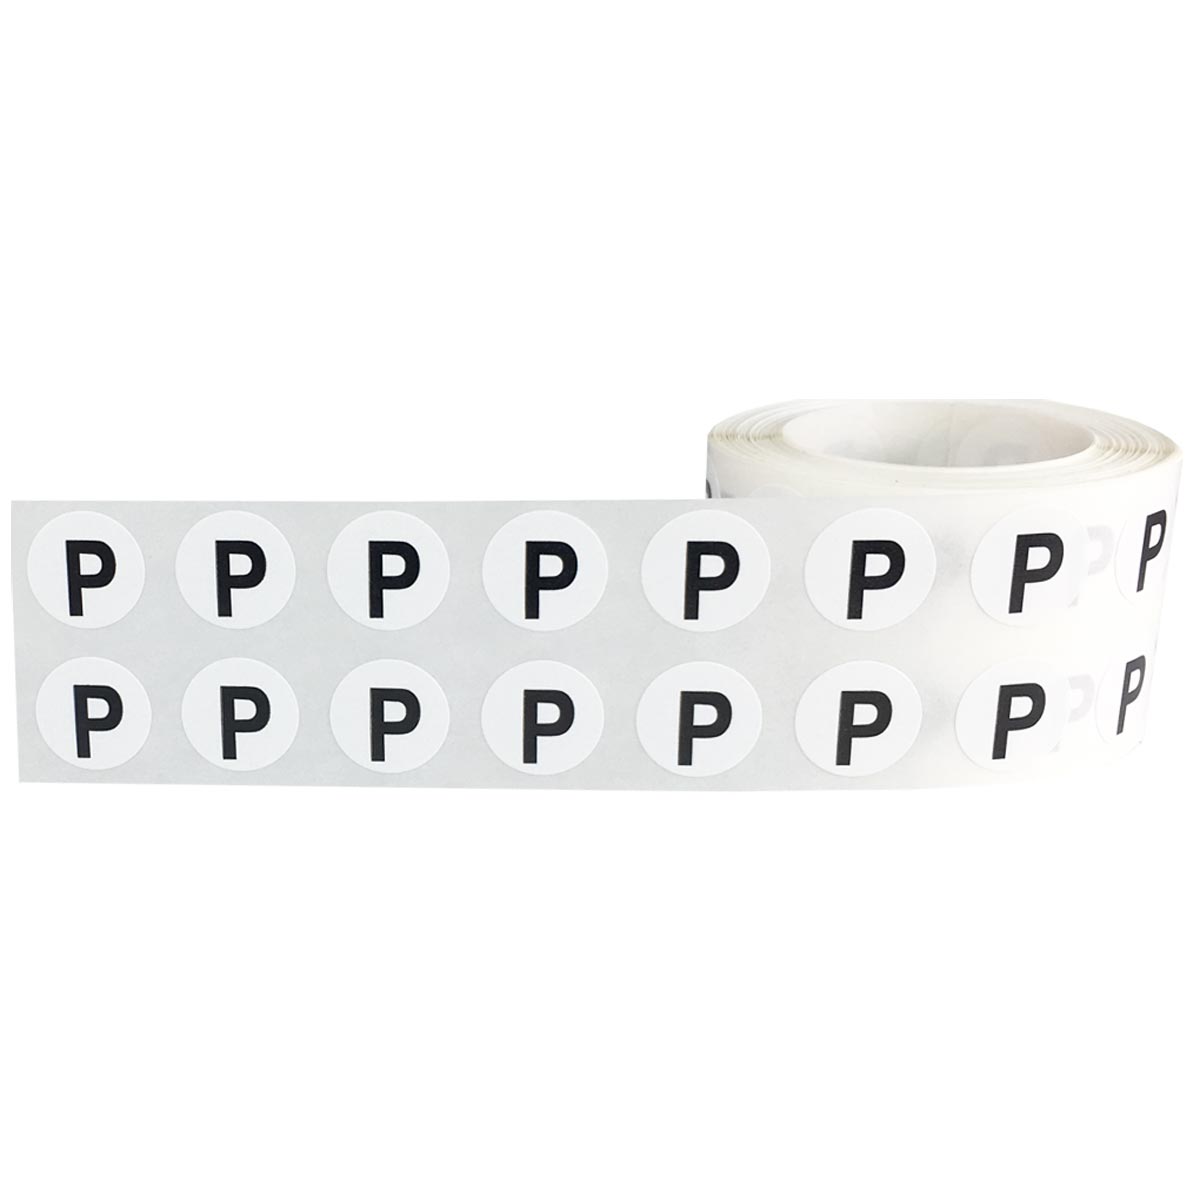 Small Letter A Stickers 1/2 Round